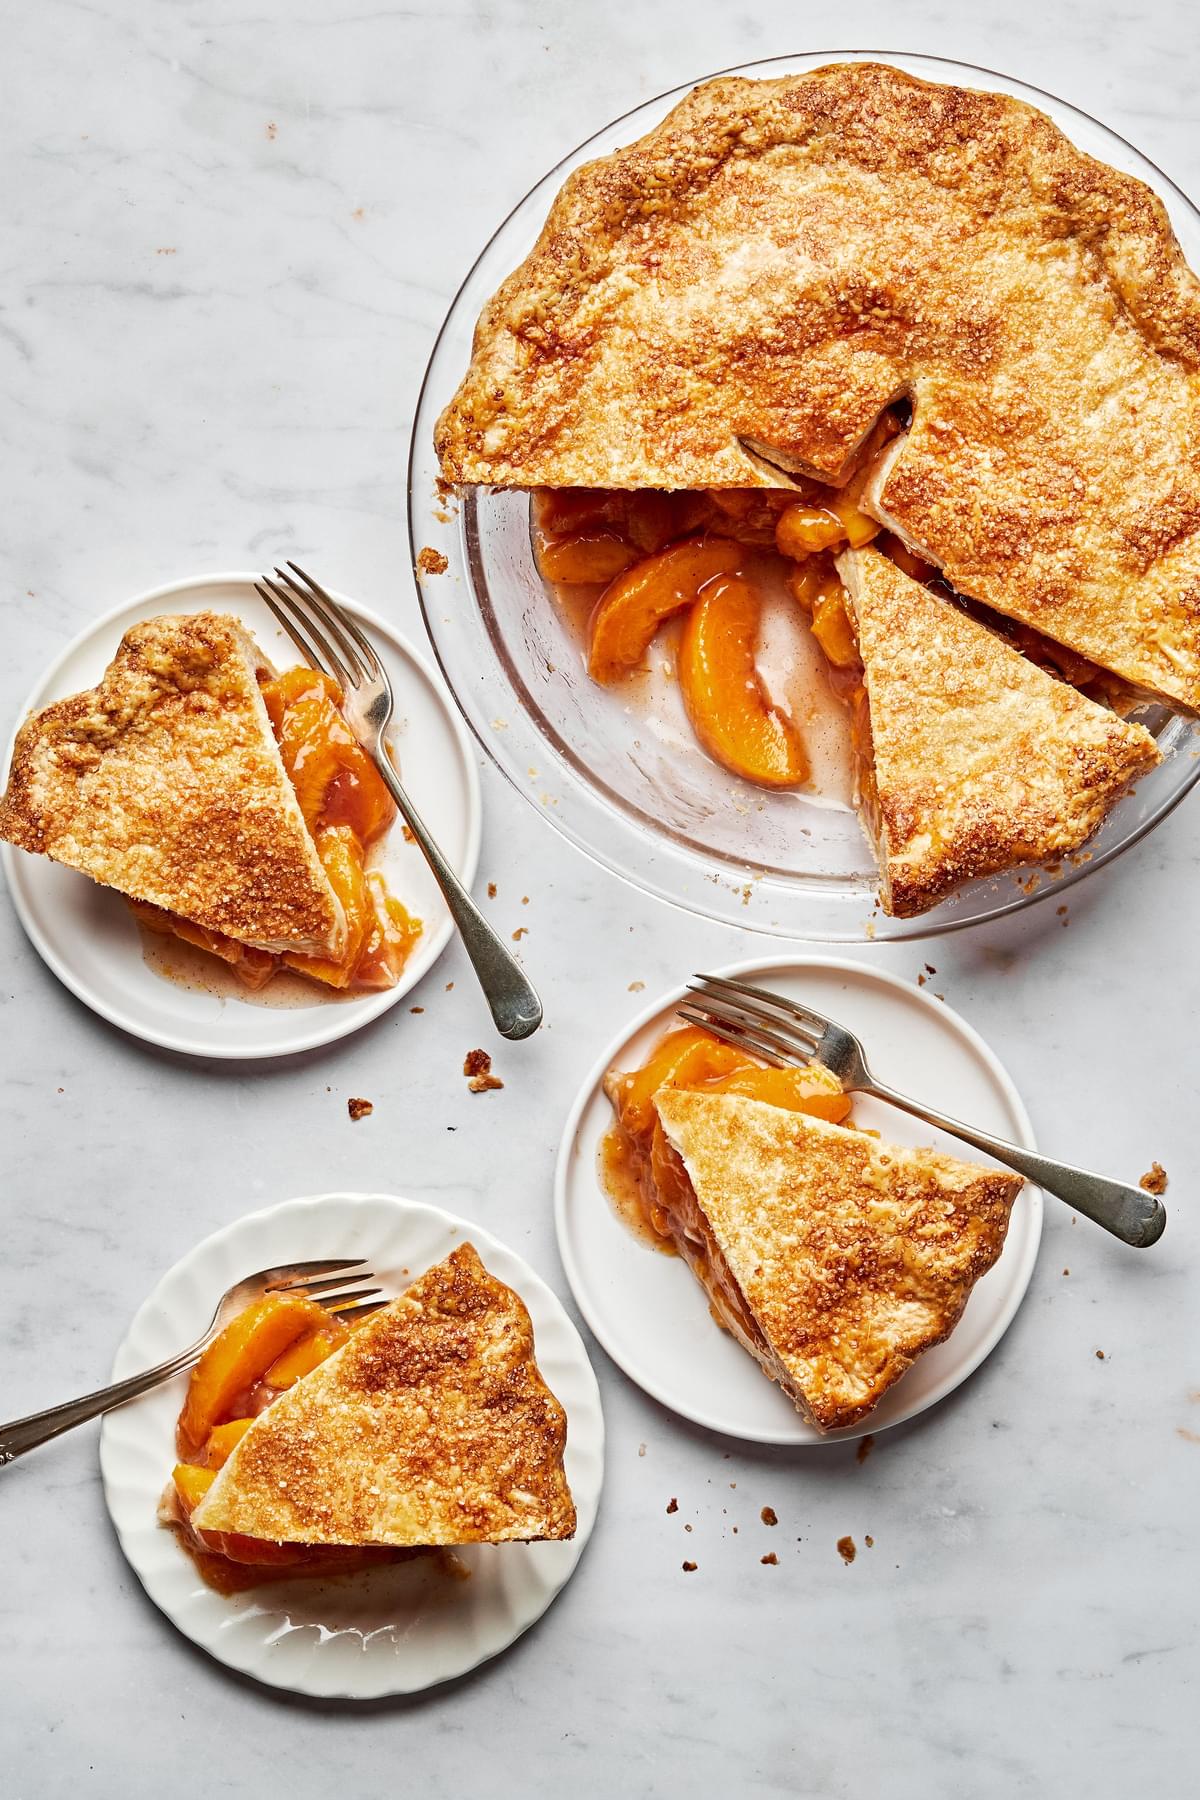 a homemade peach pie with a few slices cut out next to slices of peach pie on plates with forks